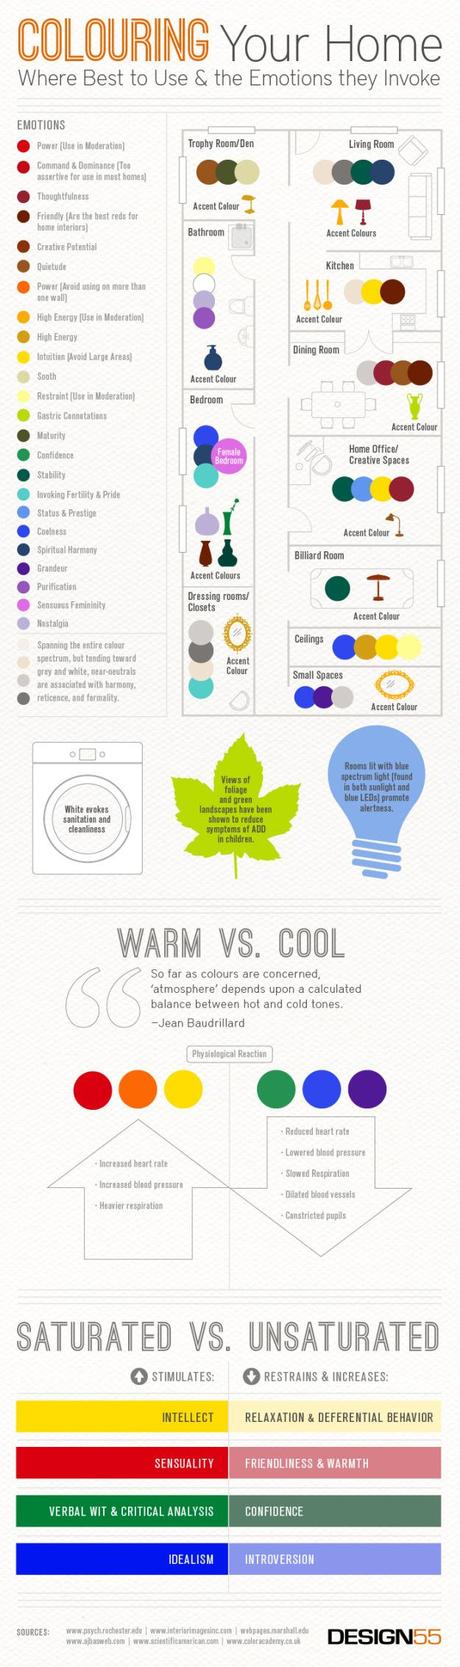 The Interior Design Guide to Colouring Your Home Infographic